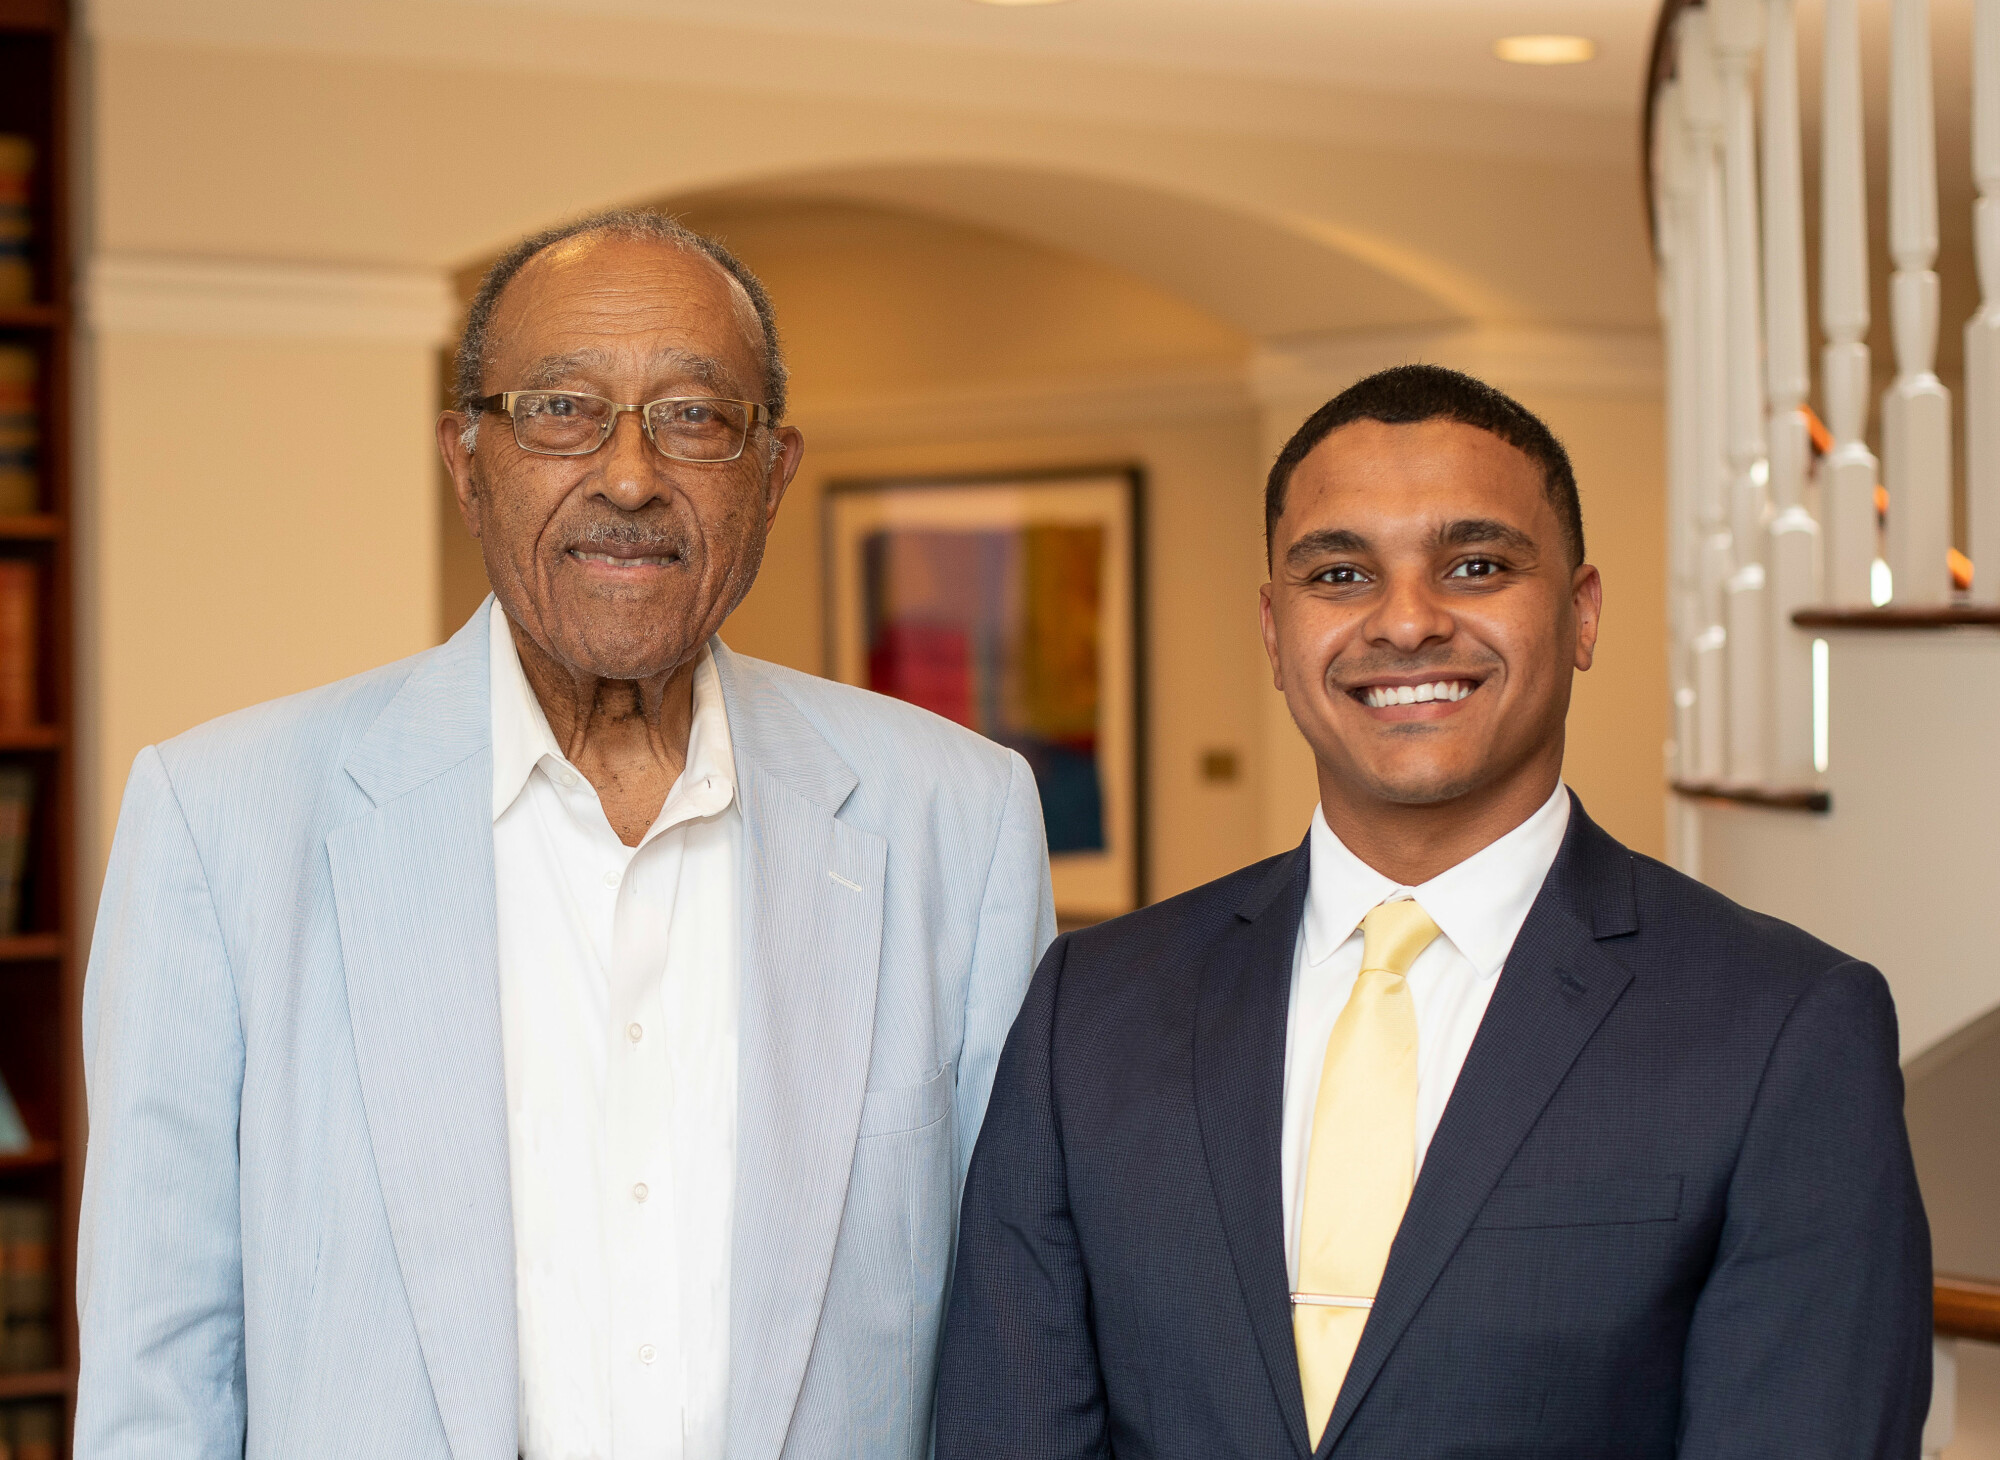 Justice Frye and Michael Youssef, 2022 Frye Diversity Fellow